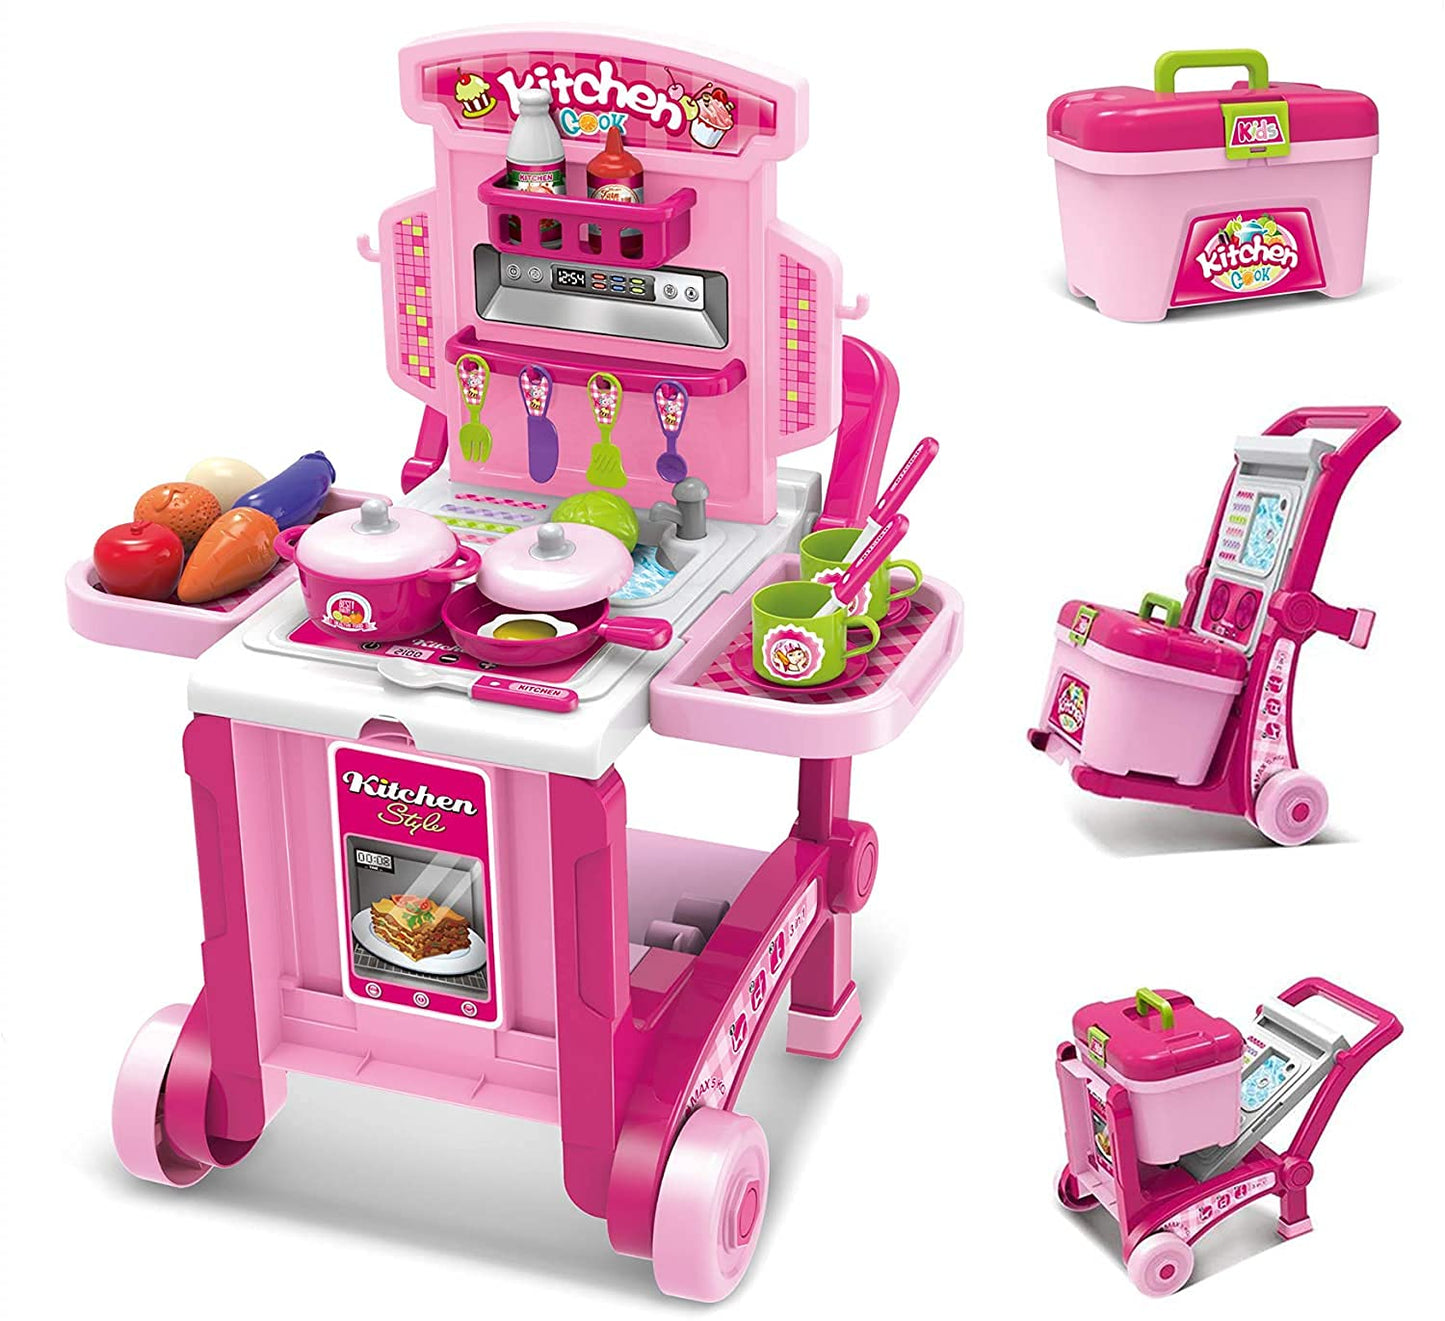 AZi® Little Chef Kitchen Set Imports Deluxe Beauty Kitchen Appliance Cooking Play Set 3 in 1 Kitchen Play Set Pretend Play Luggage Kitchen Kit for Kids with Suitcase Trolley No:008-927